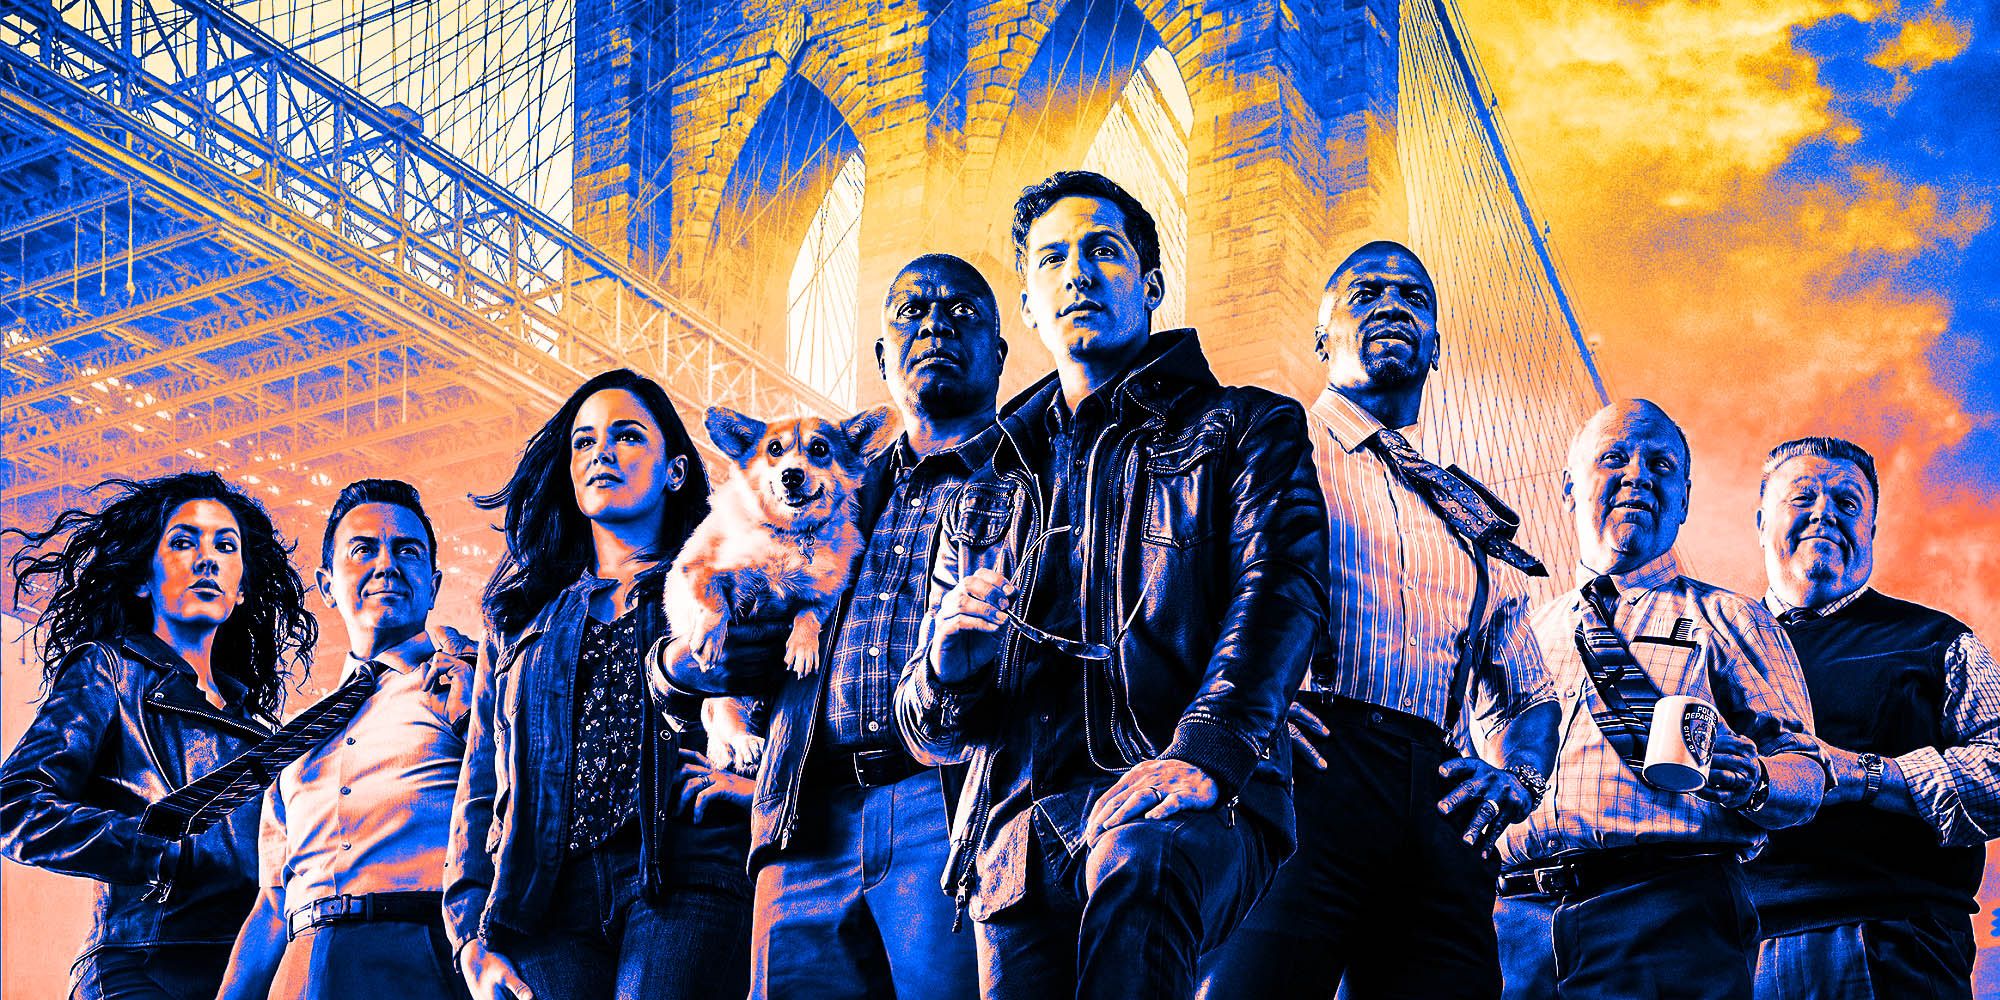 The cast of Brooklyn Nine-Nine in a promo image for the show's final season